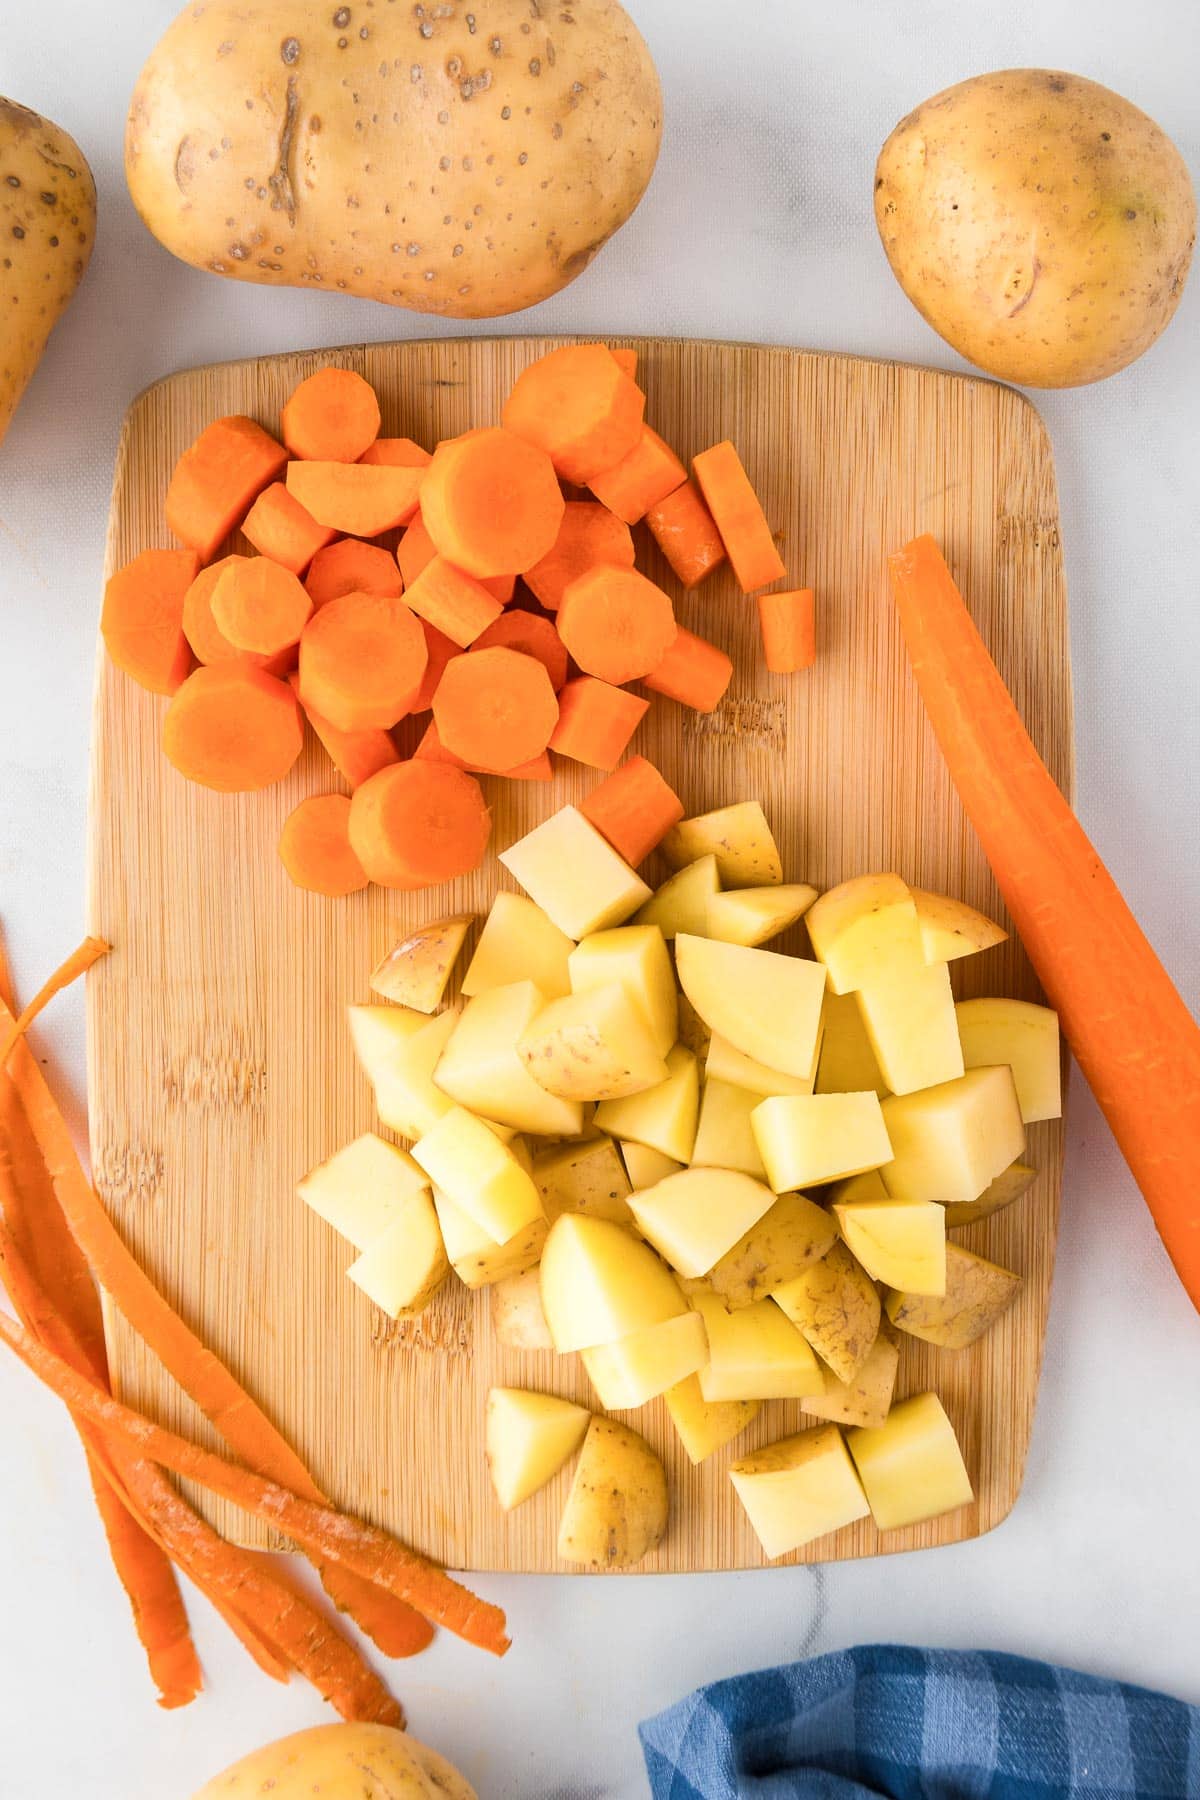 Chopped potatoes and carrots into chunks on a wooden cutting board, with whole vegetables and a cloth nearby on the countertop.